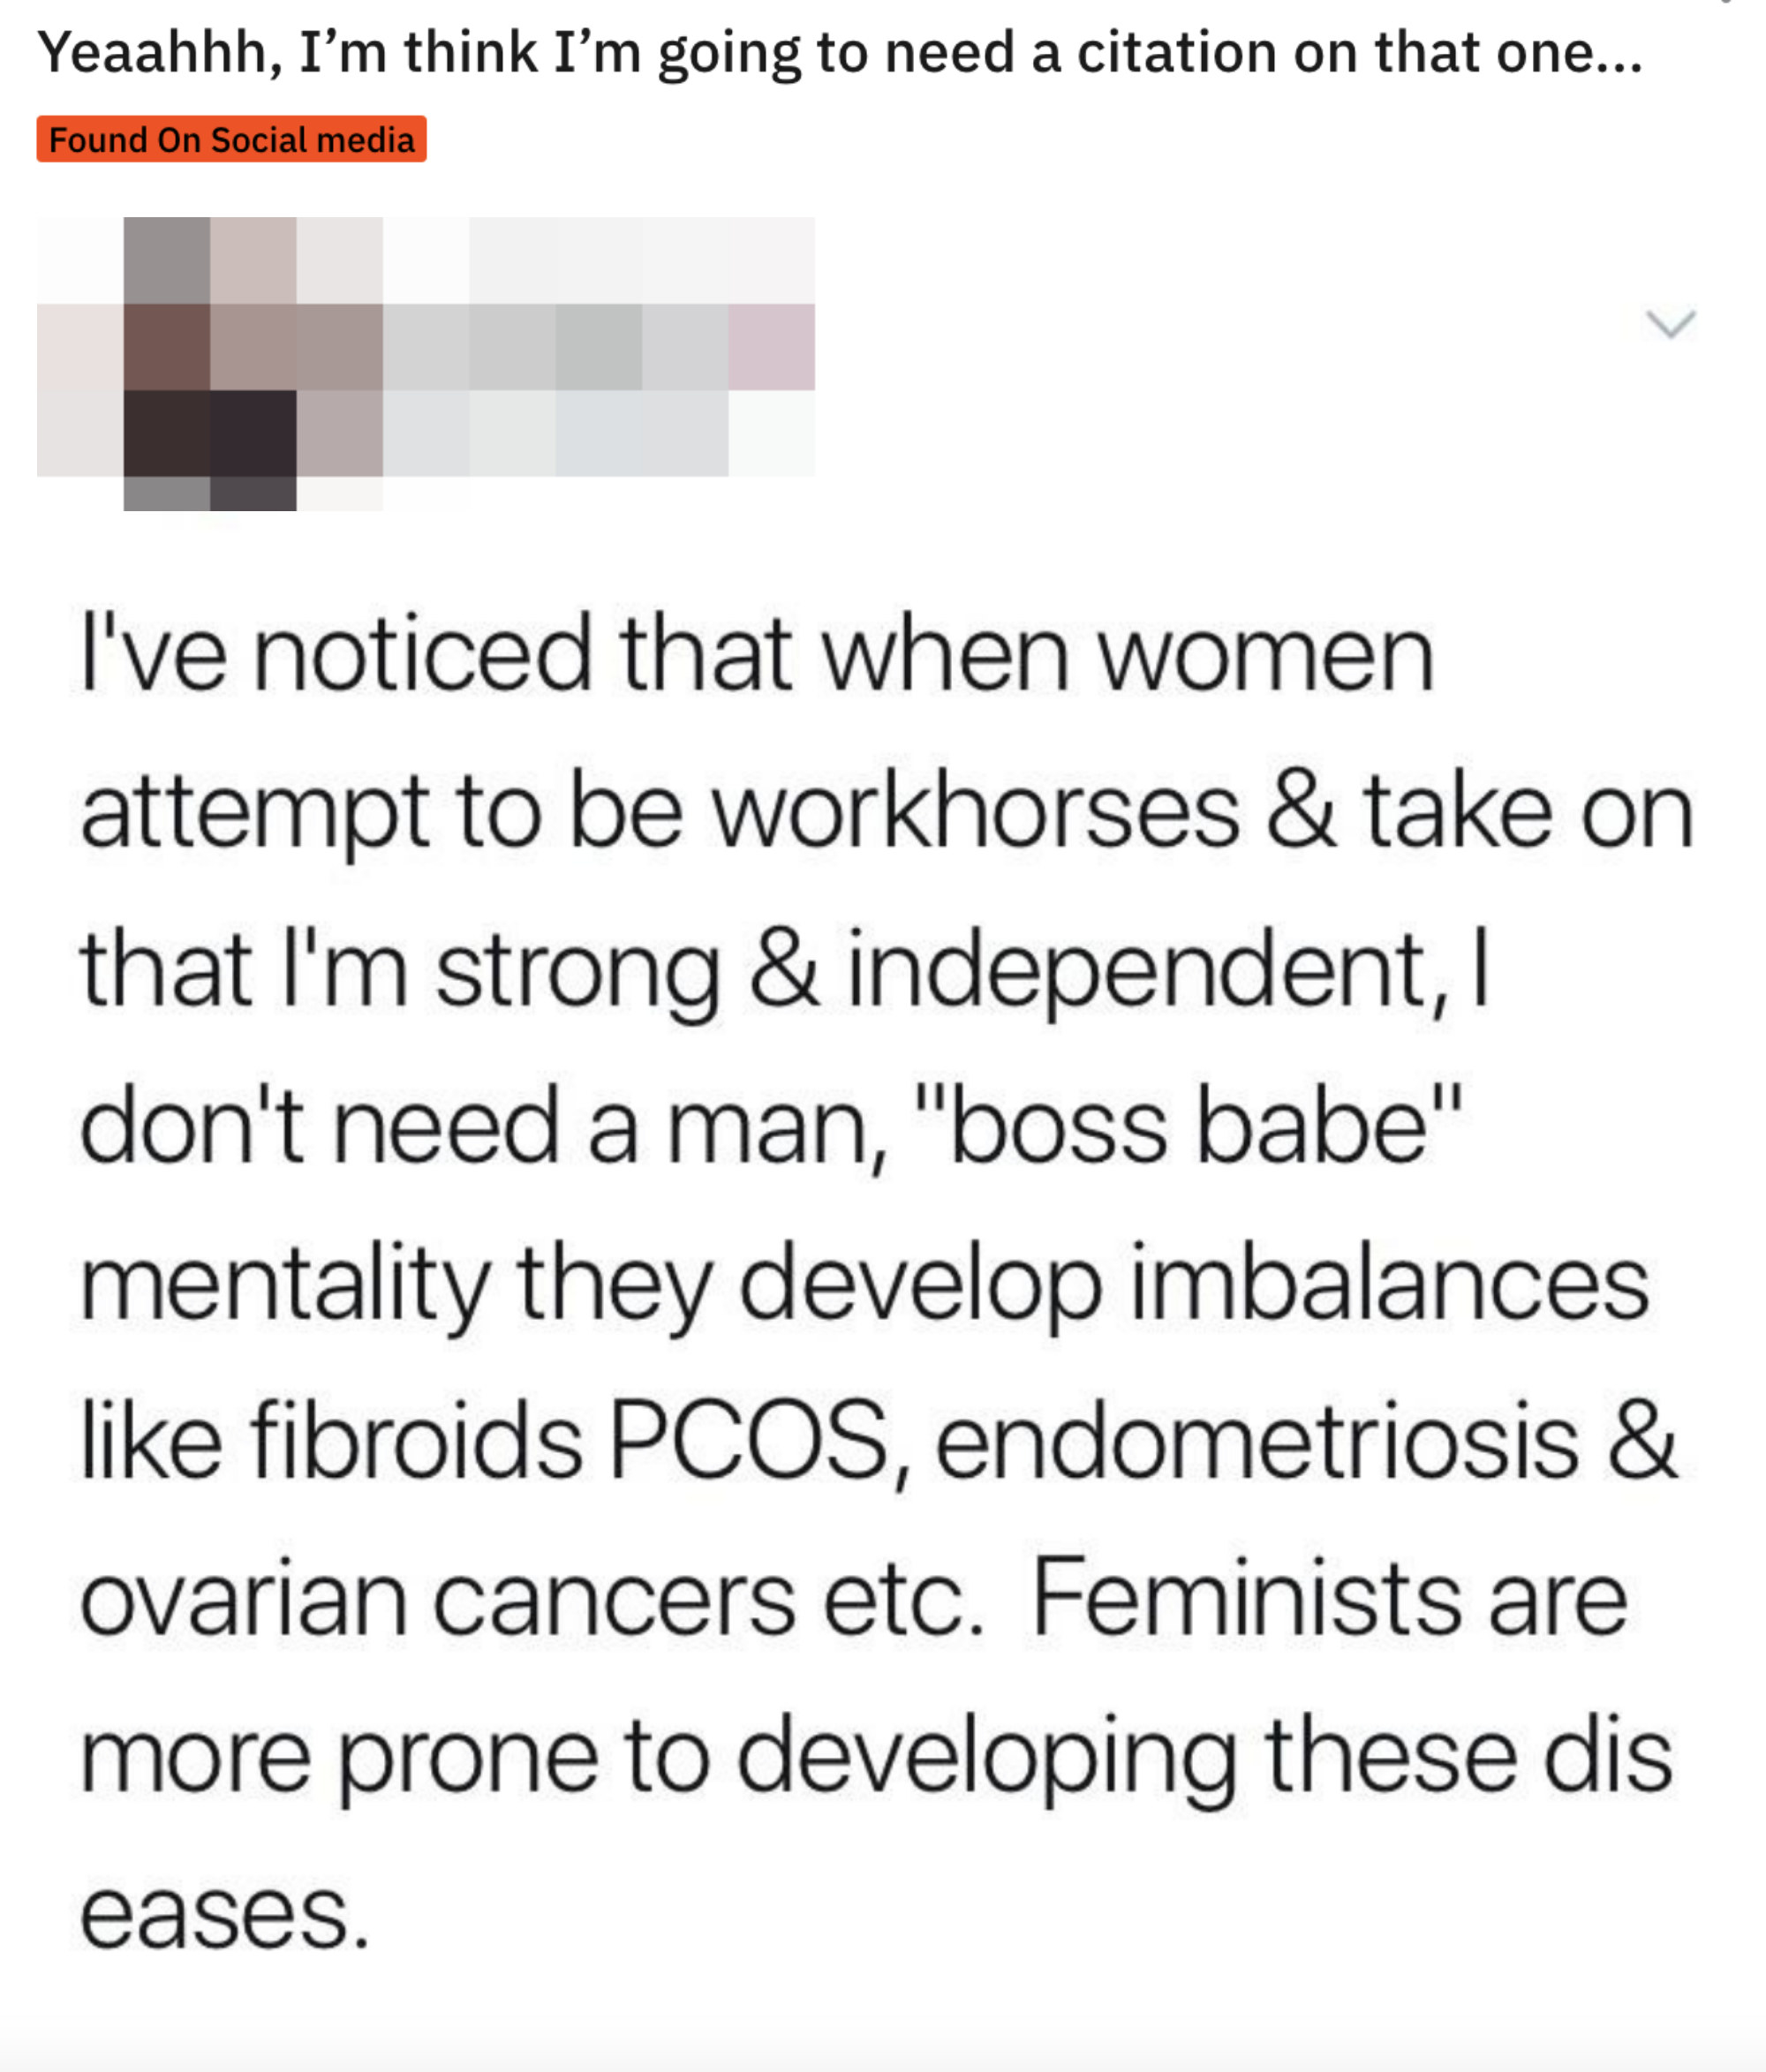 Claim that strong and independent &quot;boss babe&quot; women who don&#x27;t need a man &quot;develop imbalances like fibroids, PCOS, endometriosis and ovarian cancers; feminists are more prone to developing these diseases&quot;